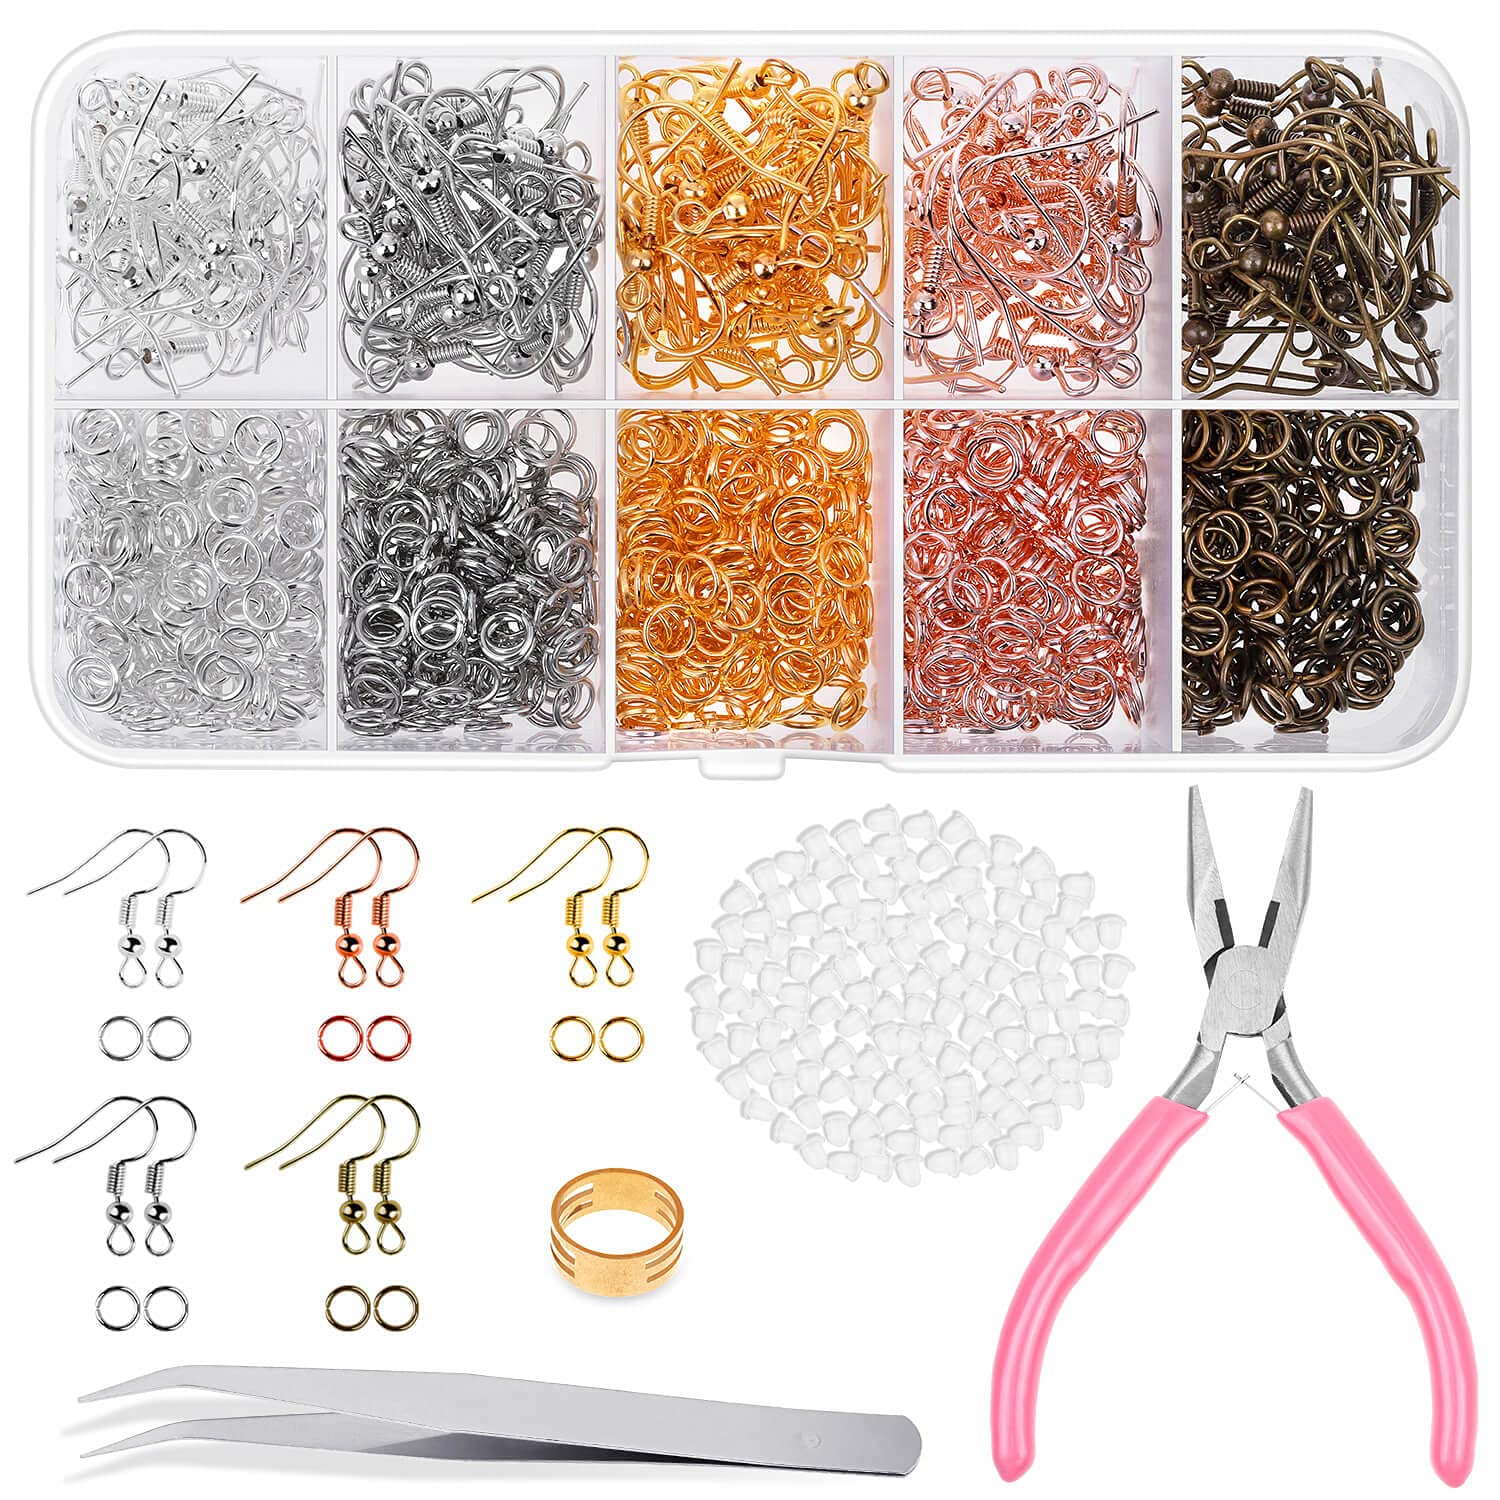  BetyBedy Mixed Colors Earring Hooks, 1125Pcs Earring Making Kit  with 125Pcs Earring Hooks and 1000pcs 4mm Open Jump Rings for Jewelry Making,  Ear Hooks for Jewelry Making Supplies Earring Findings